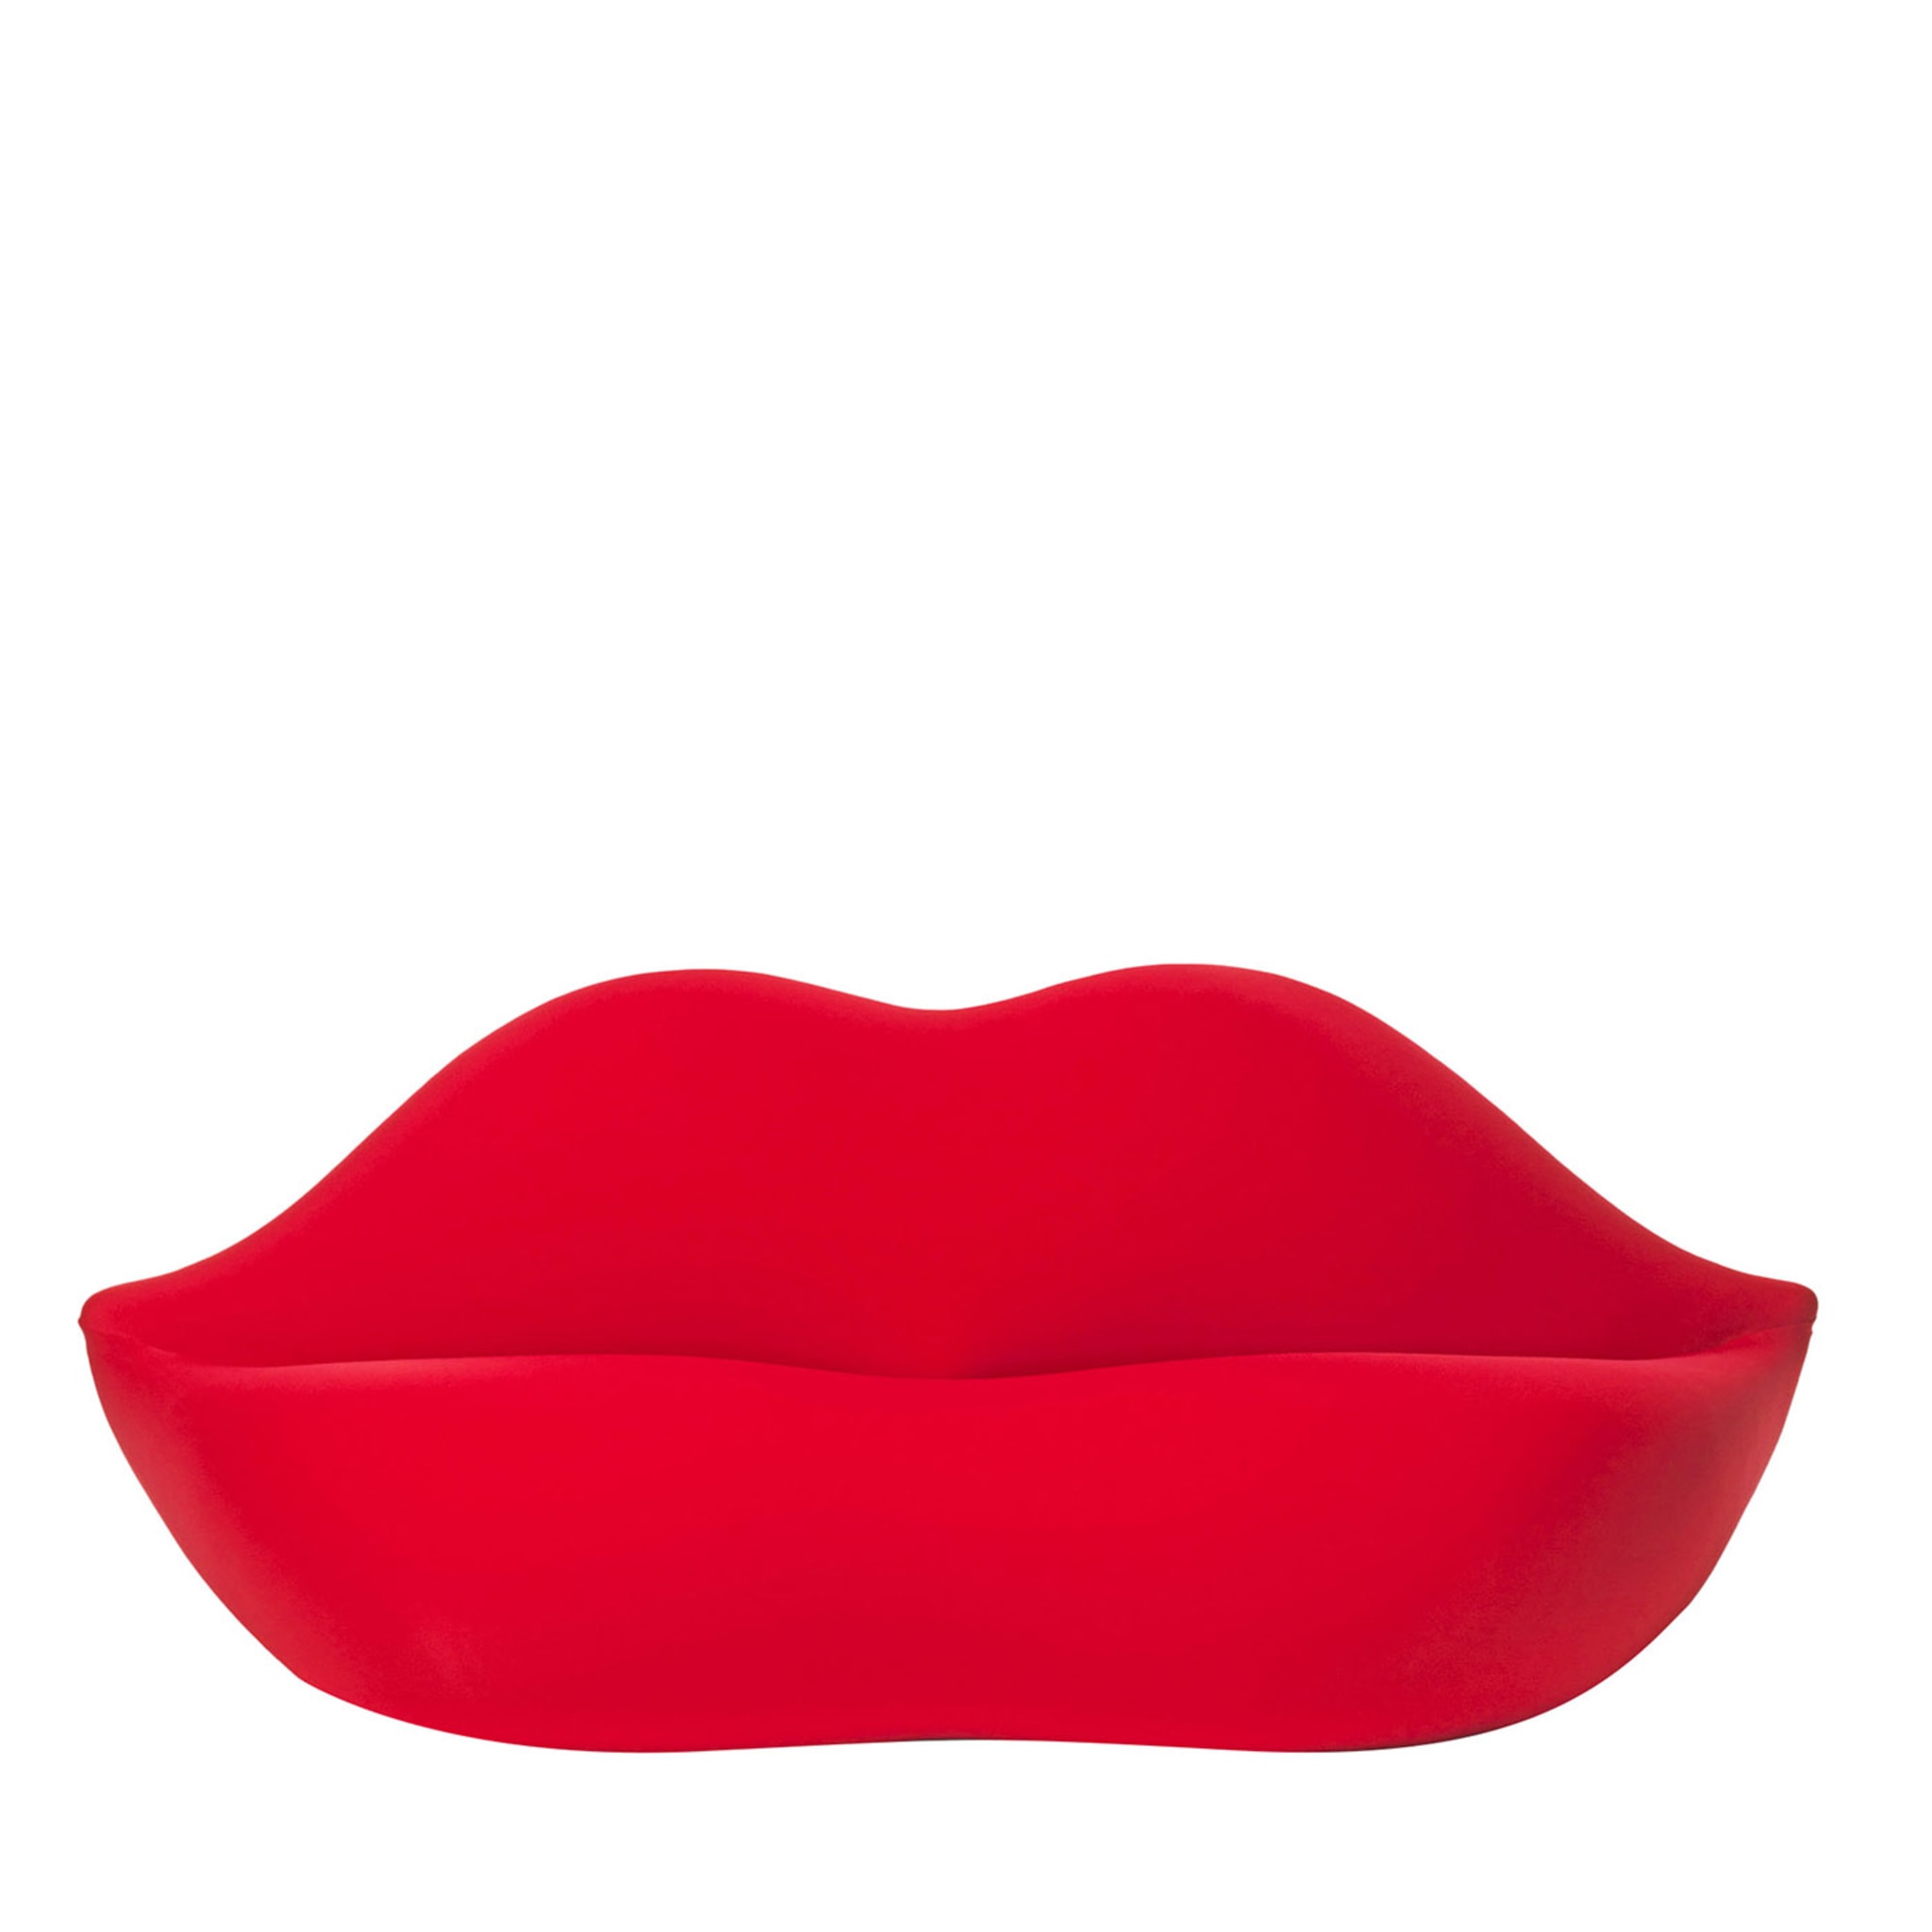 Bocca Red Limited Edition Sofa by Studio 65 - Main view